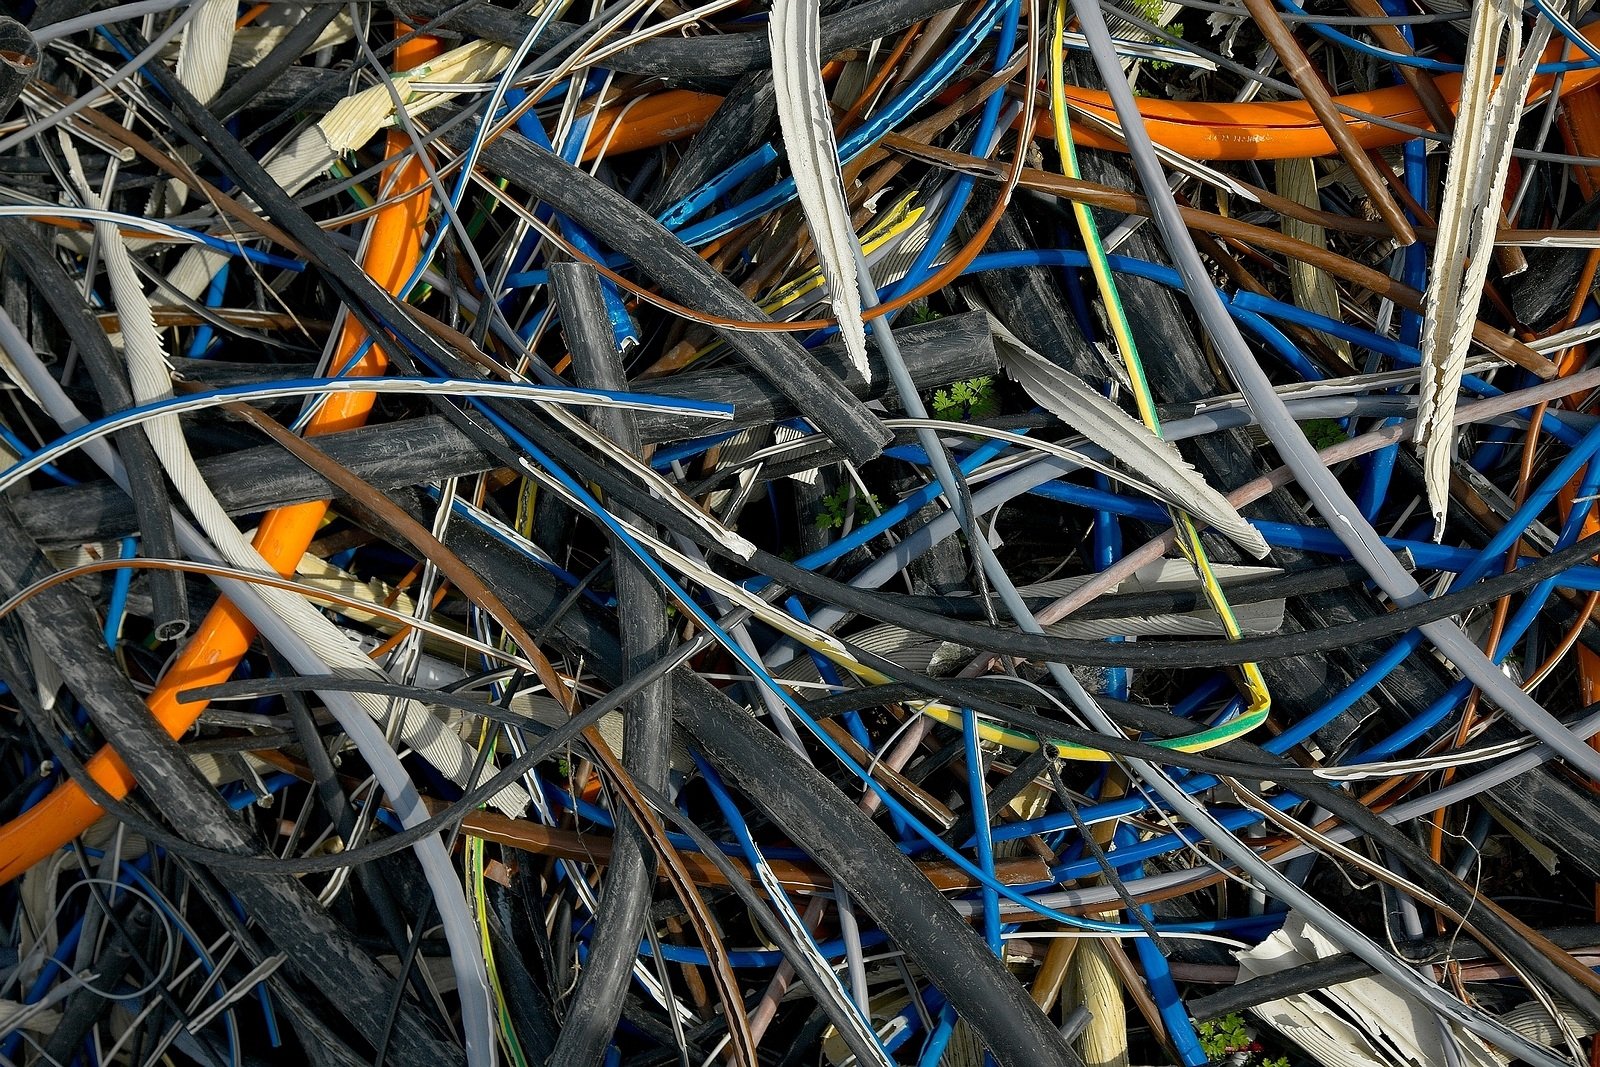 Untangling-the-Wires-Proper-Disposal-of-Electrical-Waste-Wilcox-Electric-DC